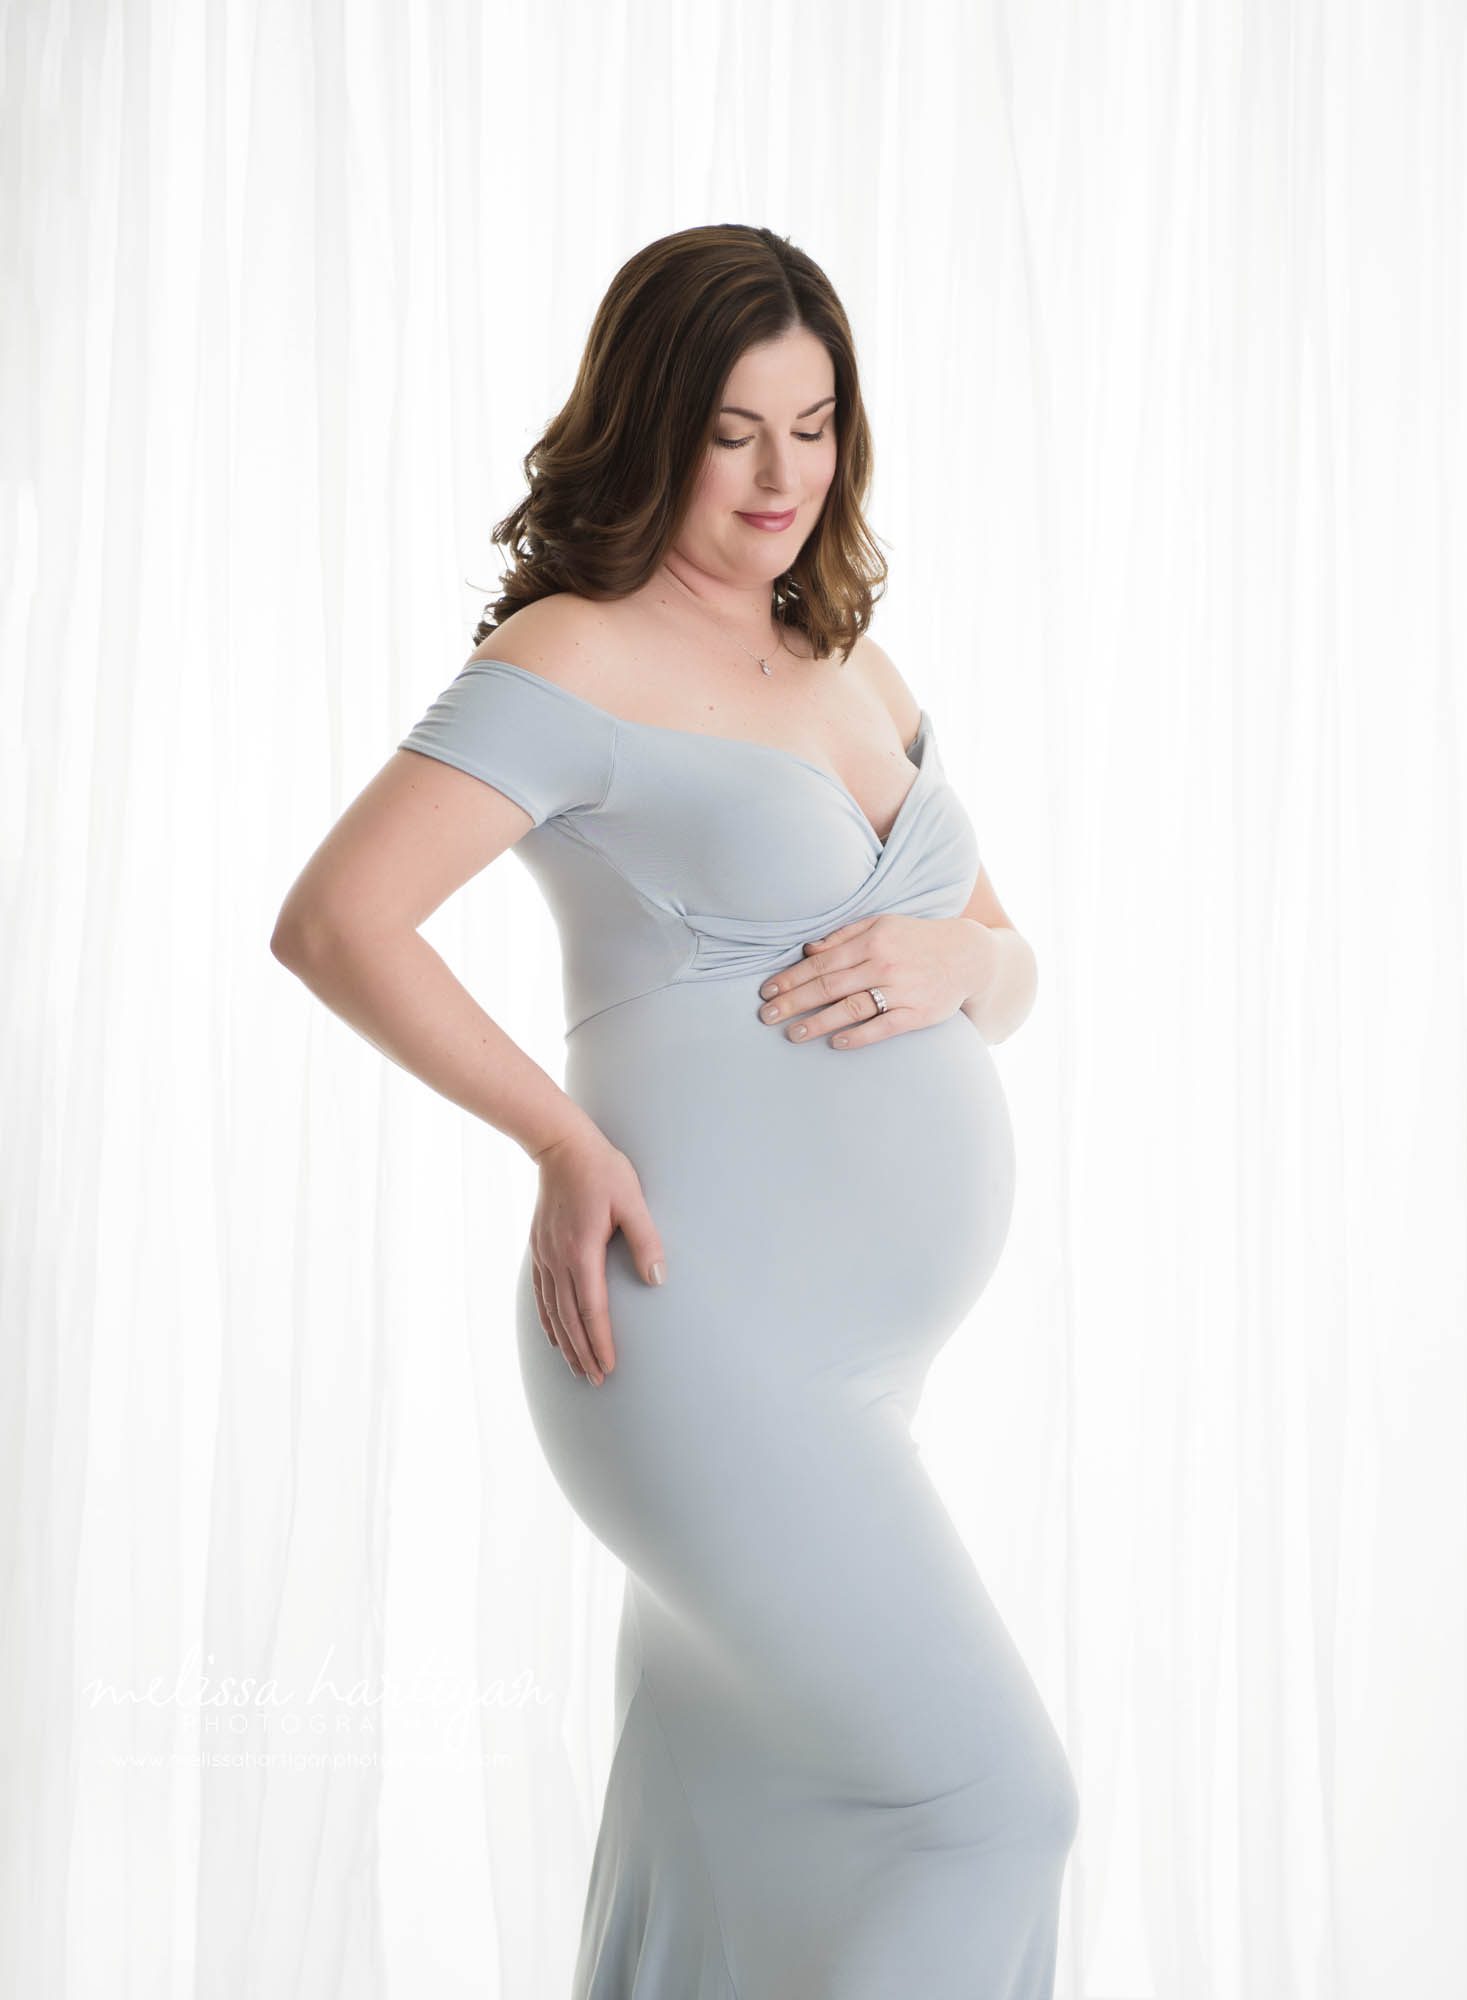 Expectant mom standing against white sheer curtain backdrop wearing off the shoulder long form fitting blue dress sweetheart neckline one hand on side one hand on baby bump looking down at baby bump Tolland Maternity Photography